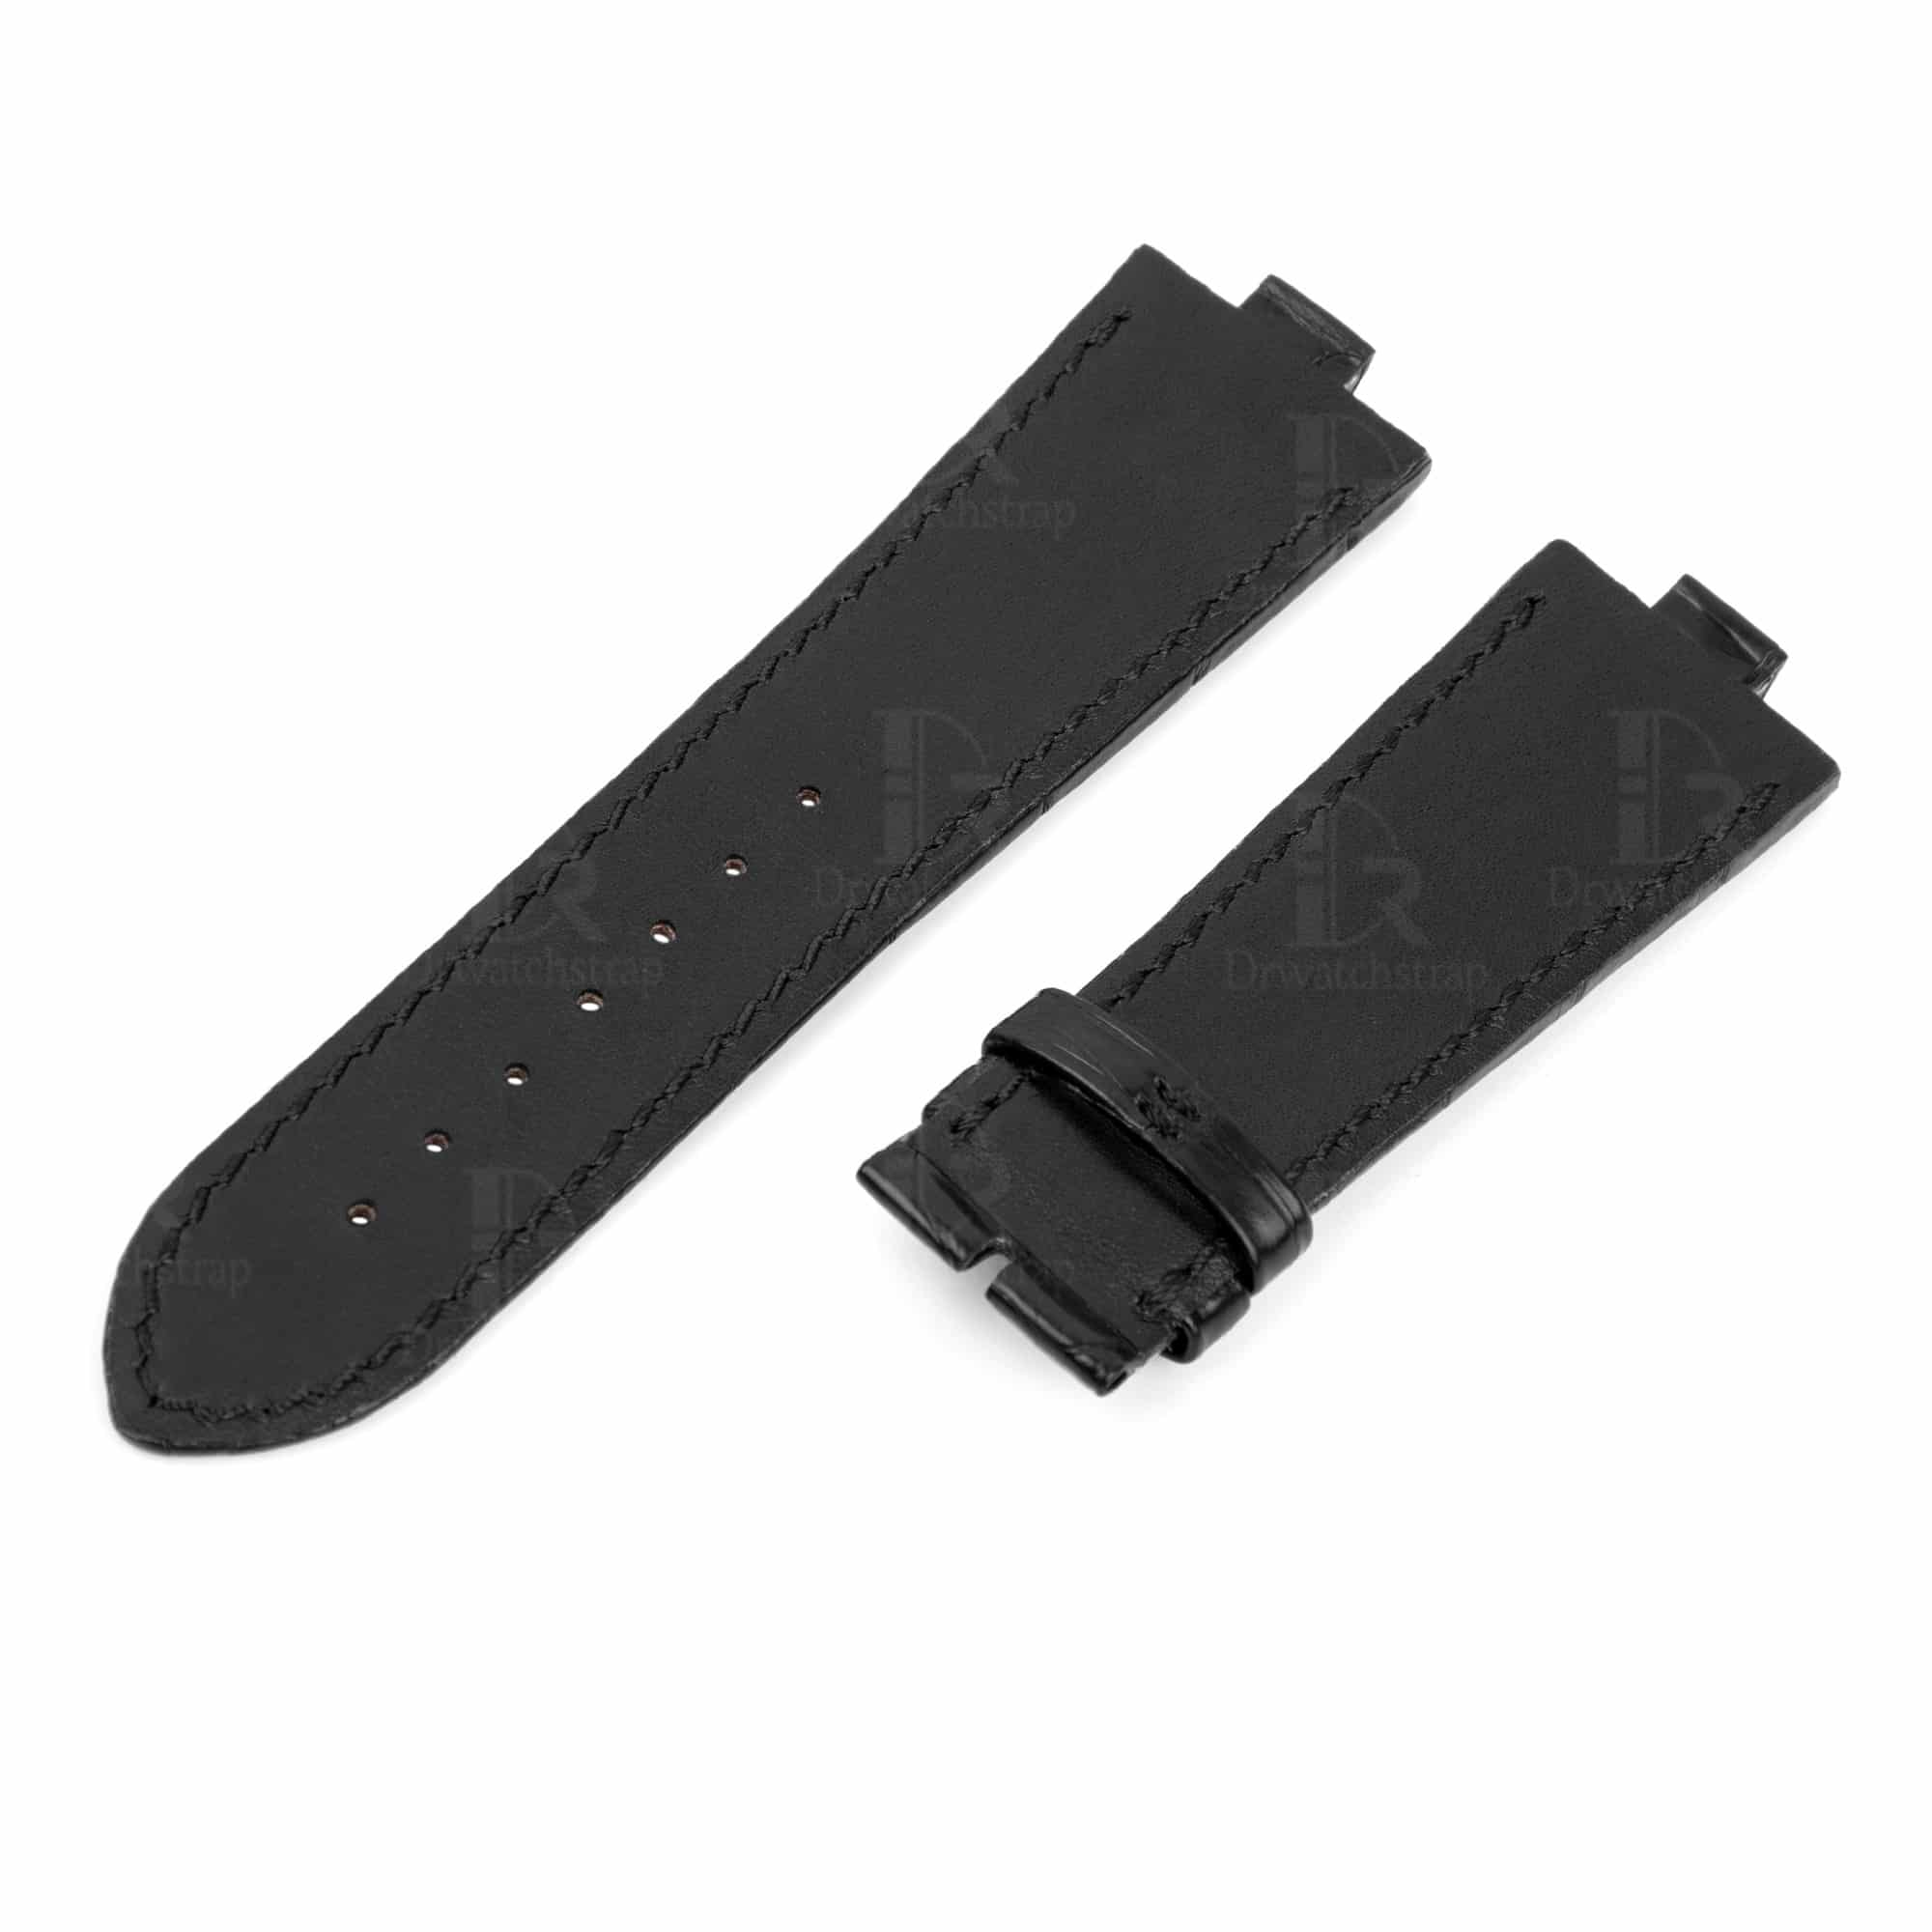 Vacheron Constantin Overseas Leather Strap replacement for sale Custom handmade Black American Alligator watch bands wholesale and retail